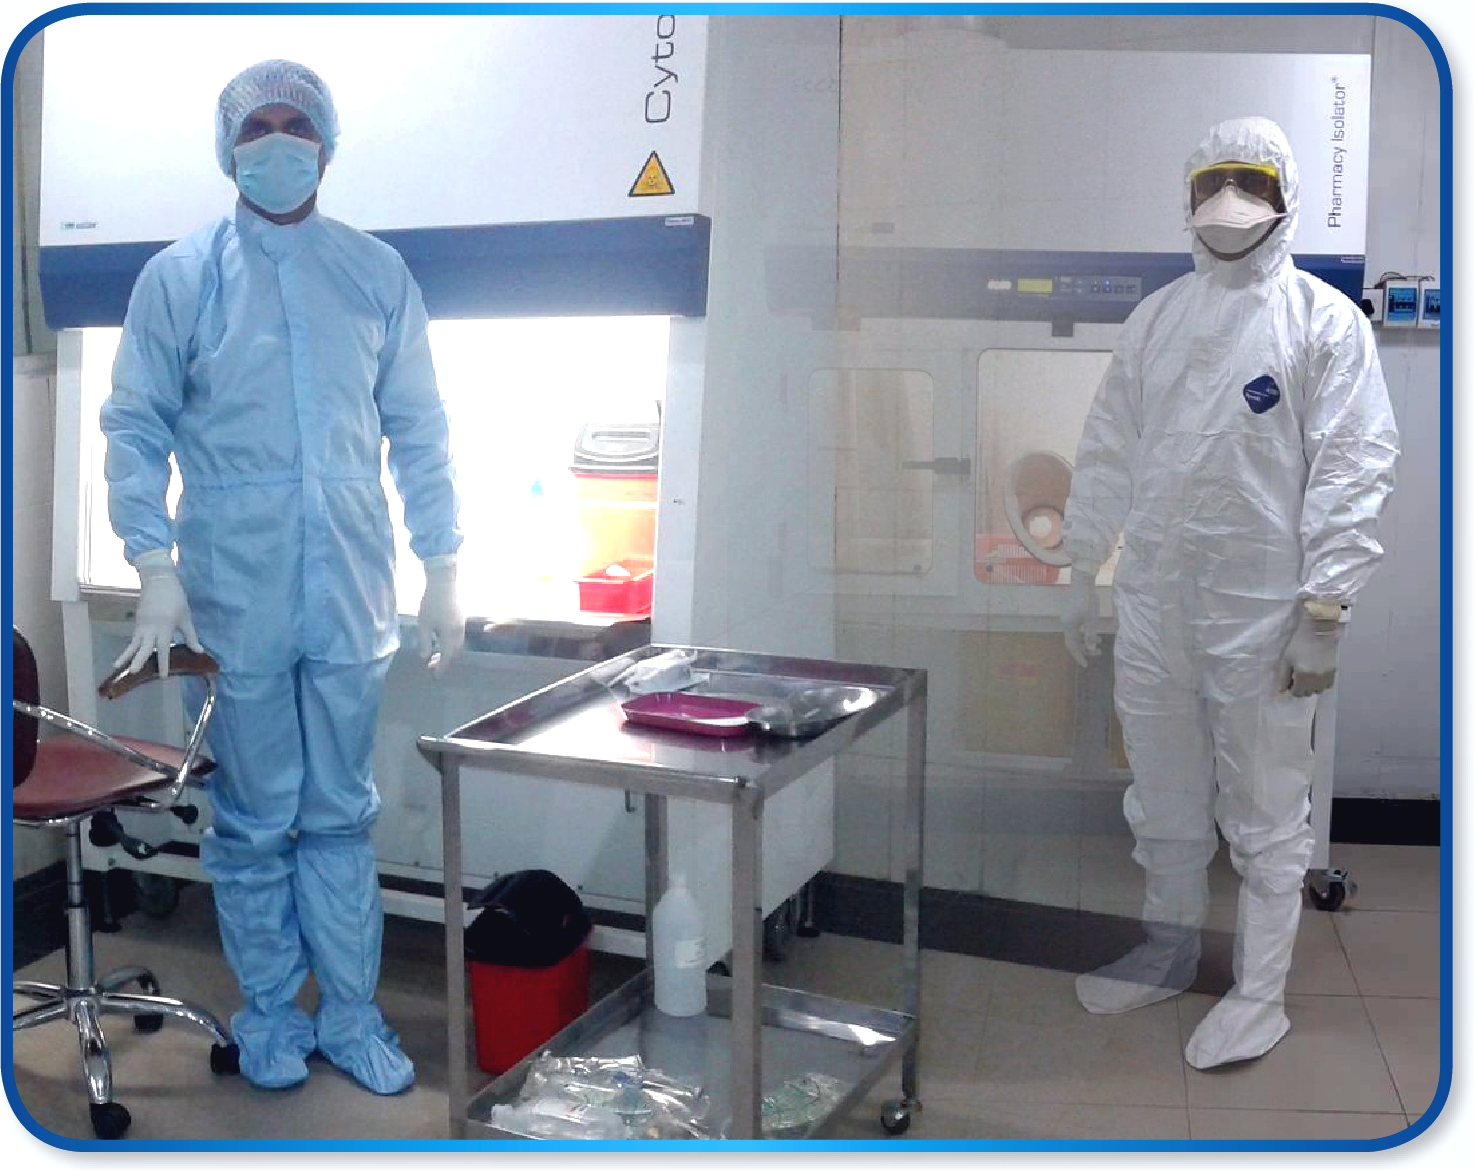 Esco equipment: Cytoculture® Cytotoxic Safety Cabinet